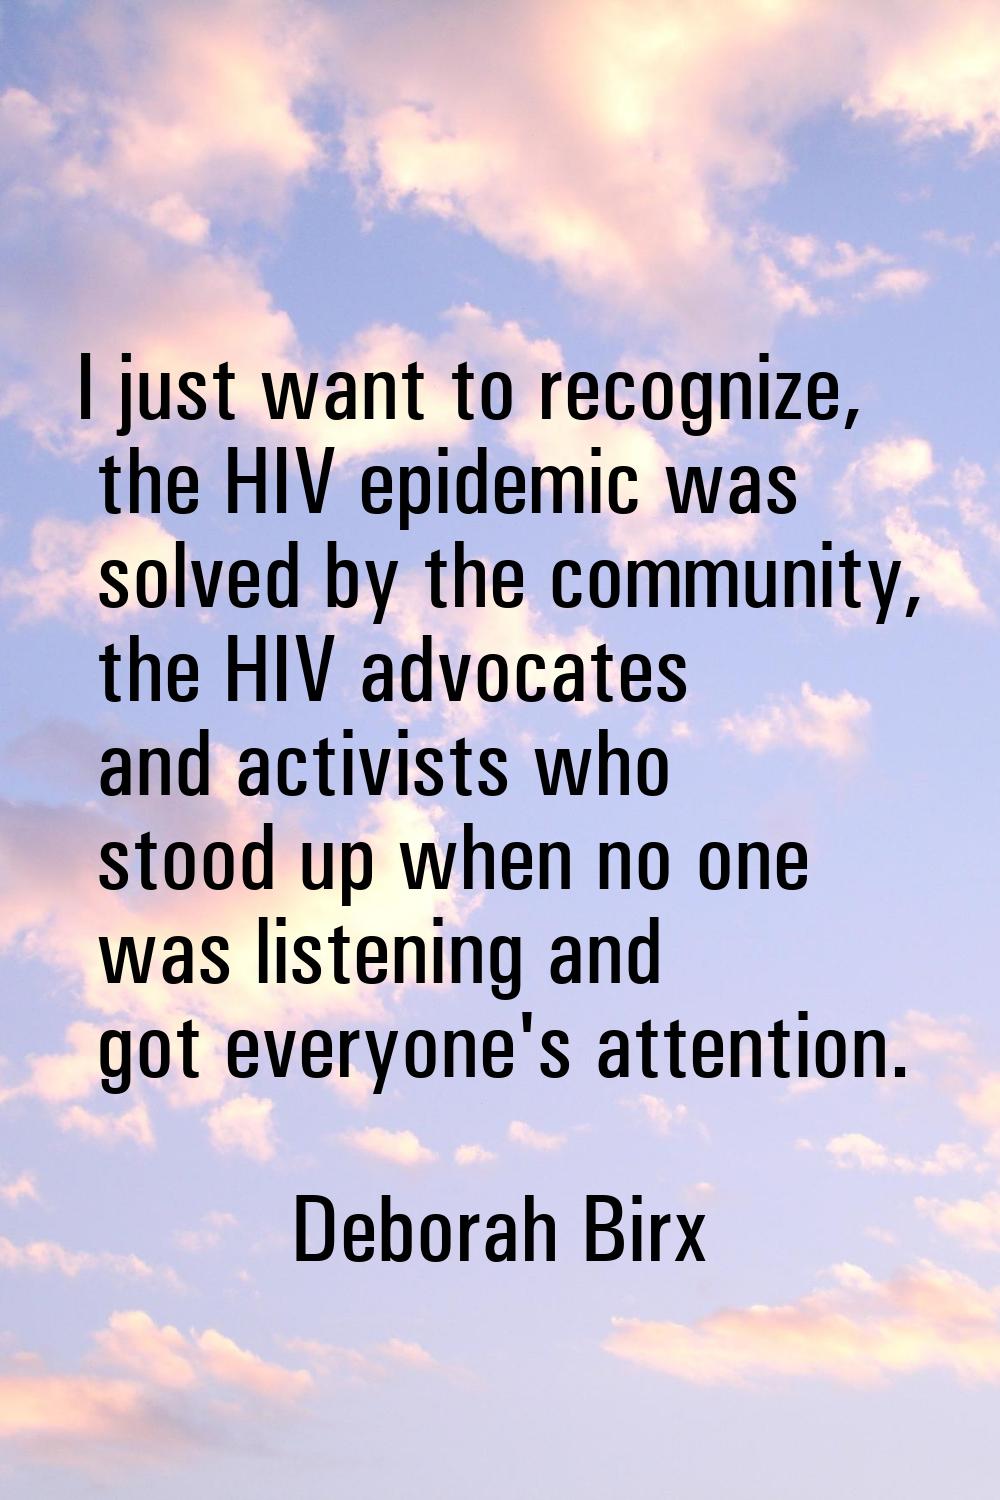 I just want to recognize, the HIV epidemic was solved by the community, the HIV advocates and activ